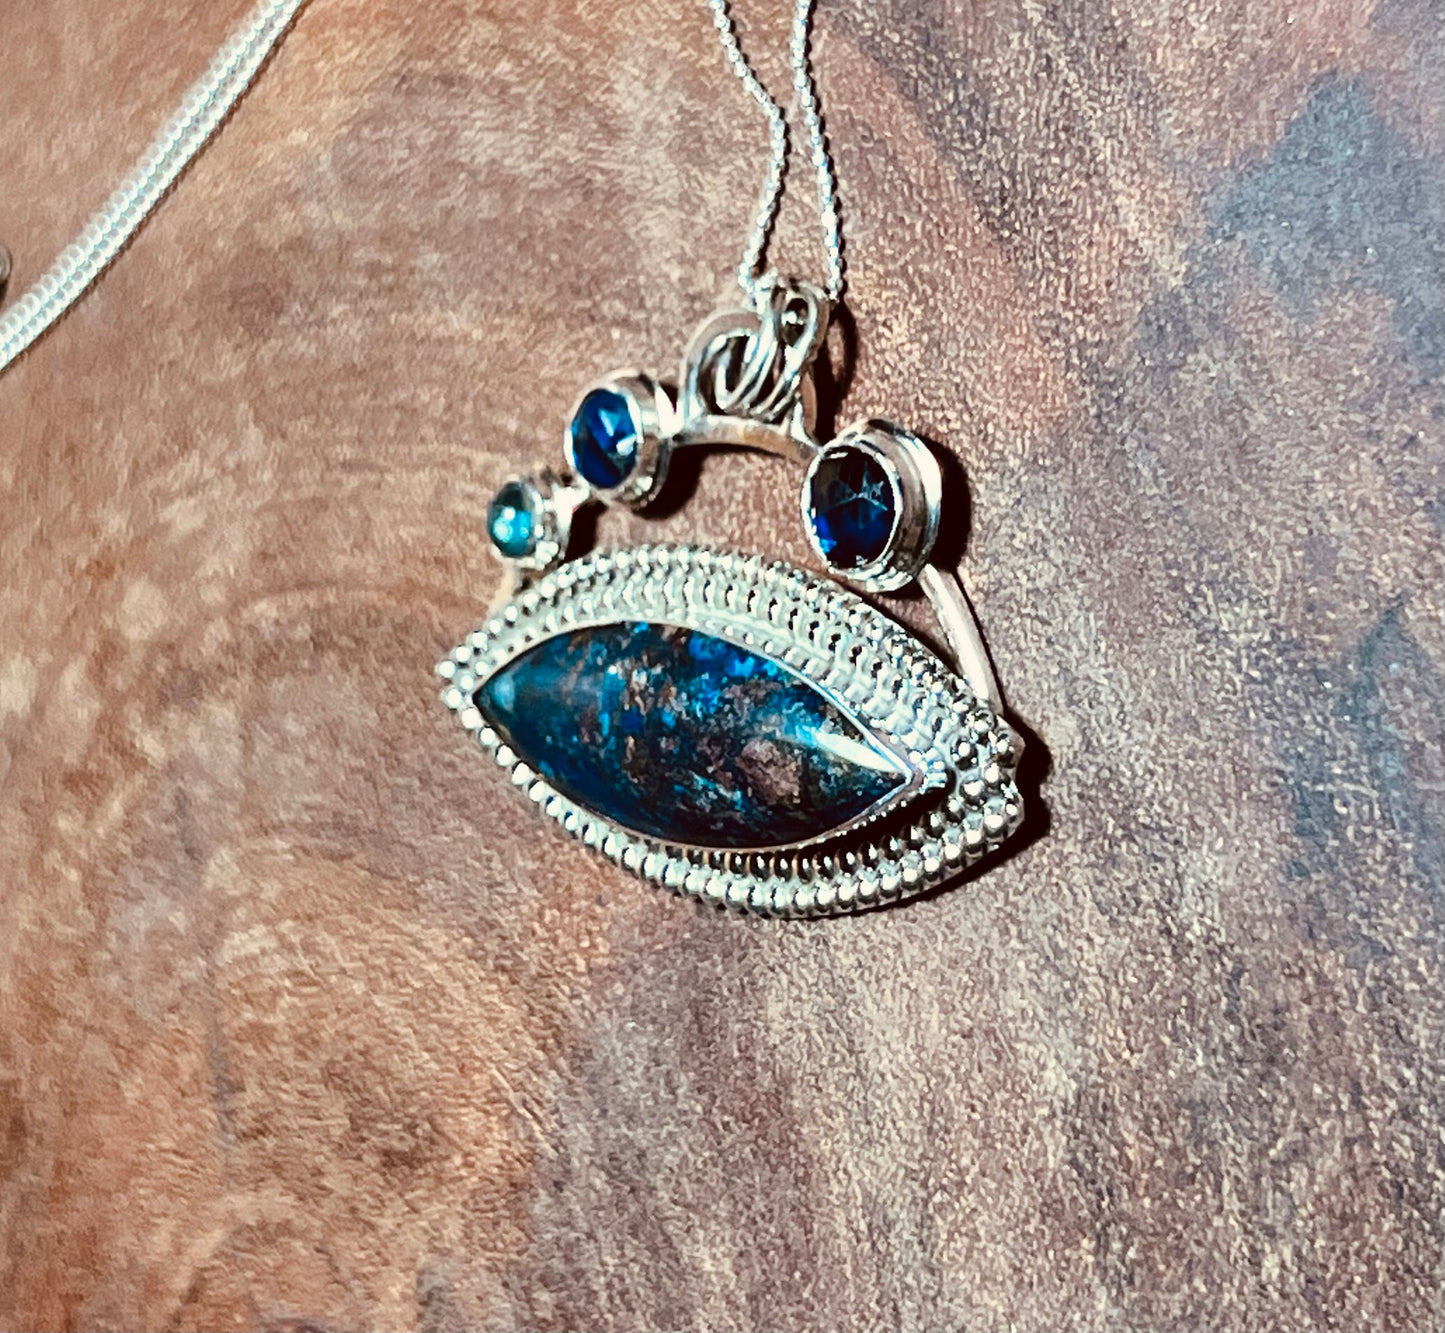 Shattuckite with Blue Kyanite and Neon Apatite Sterling Silver Pendant